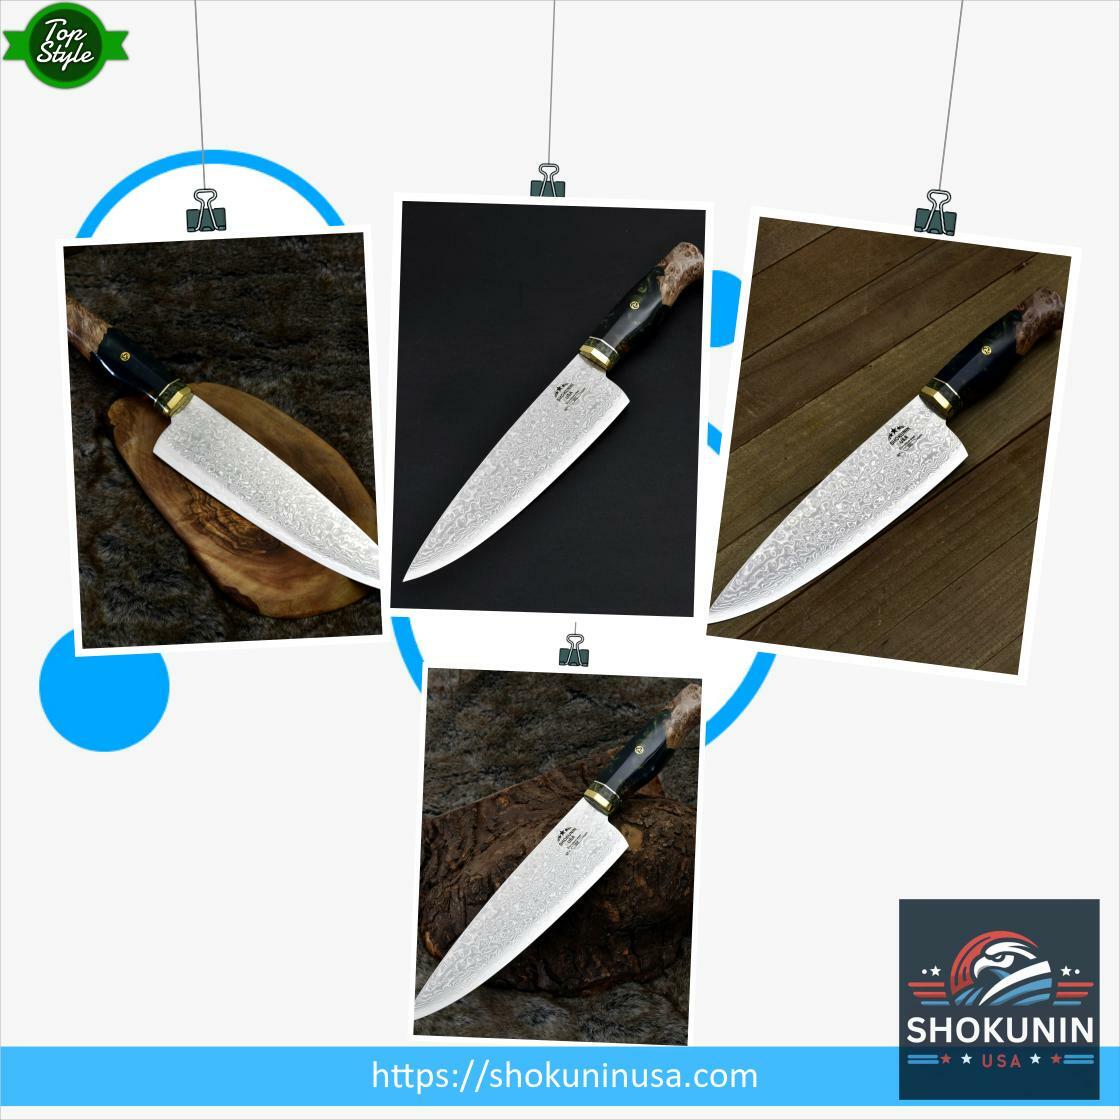 Shinobi Damascus Chef Knife with Exotic Olive Wood Handle shokuninusa.com/products/custo…
 #cutlery #GiftsForTechDads